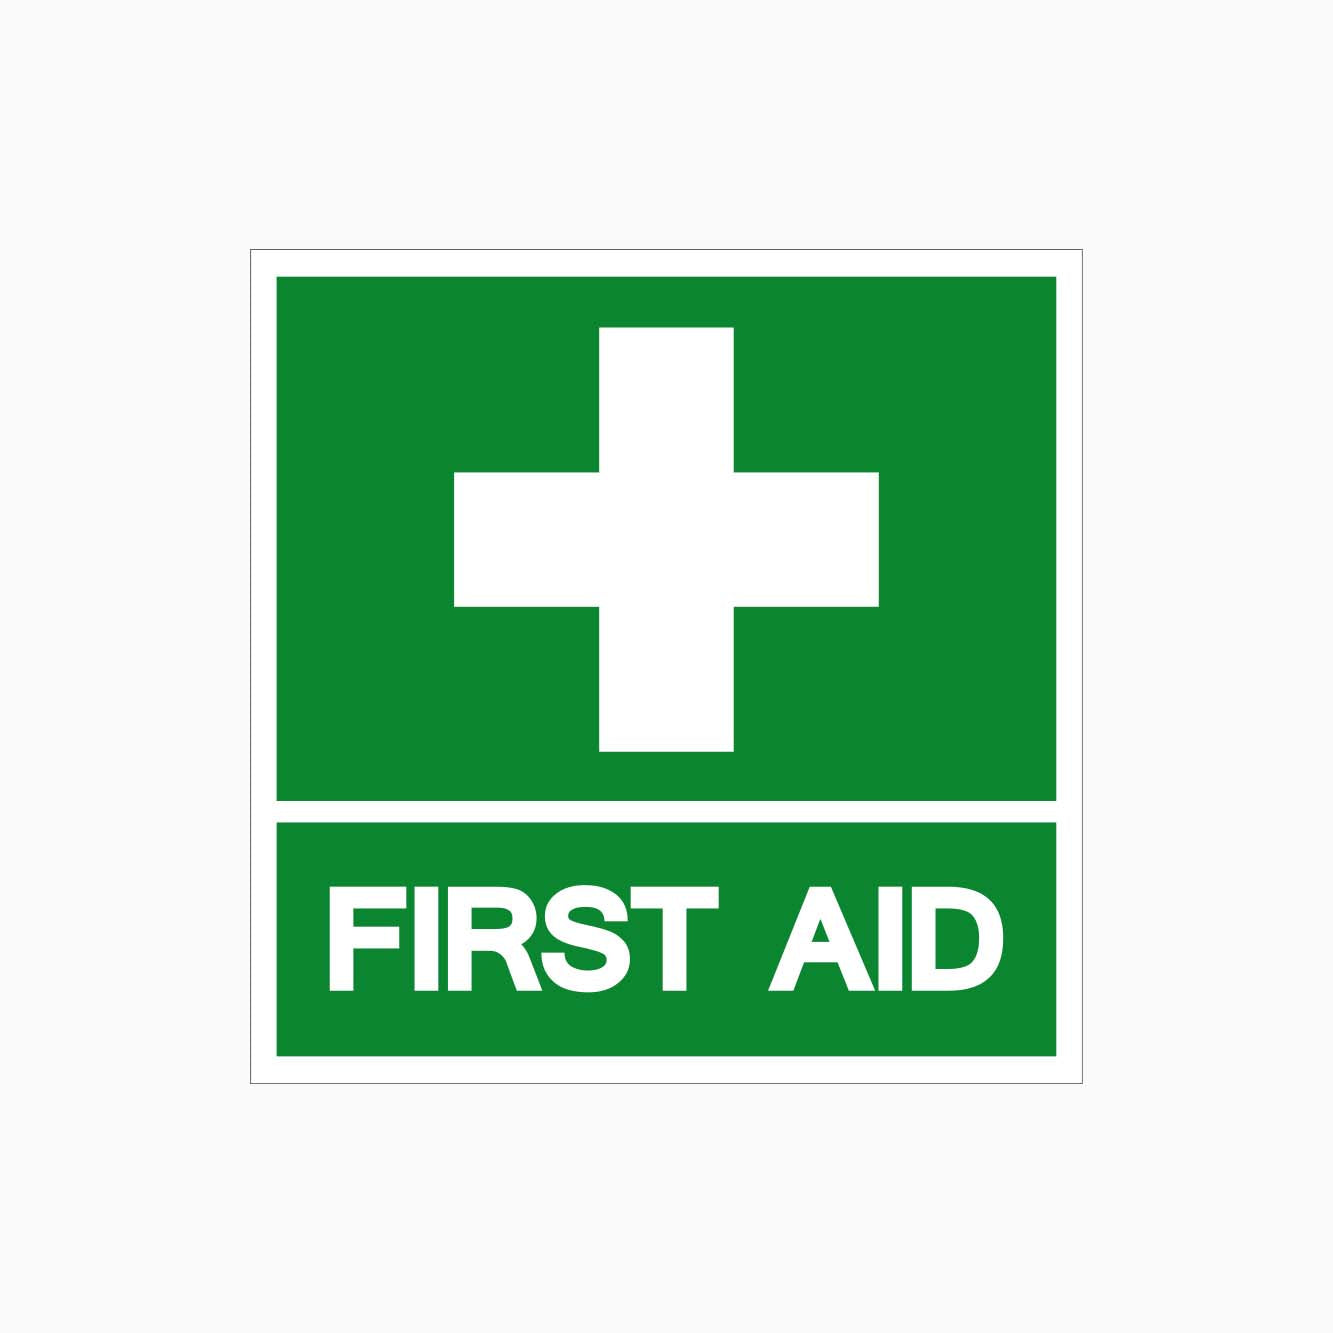 FIRST AID SIGN - GET SIGNS